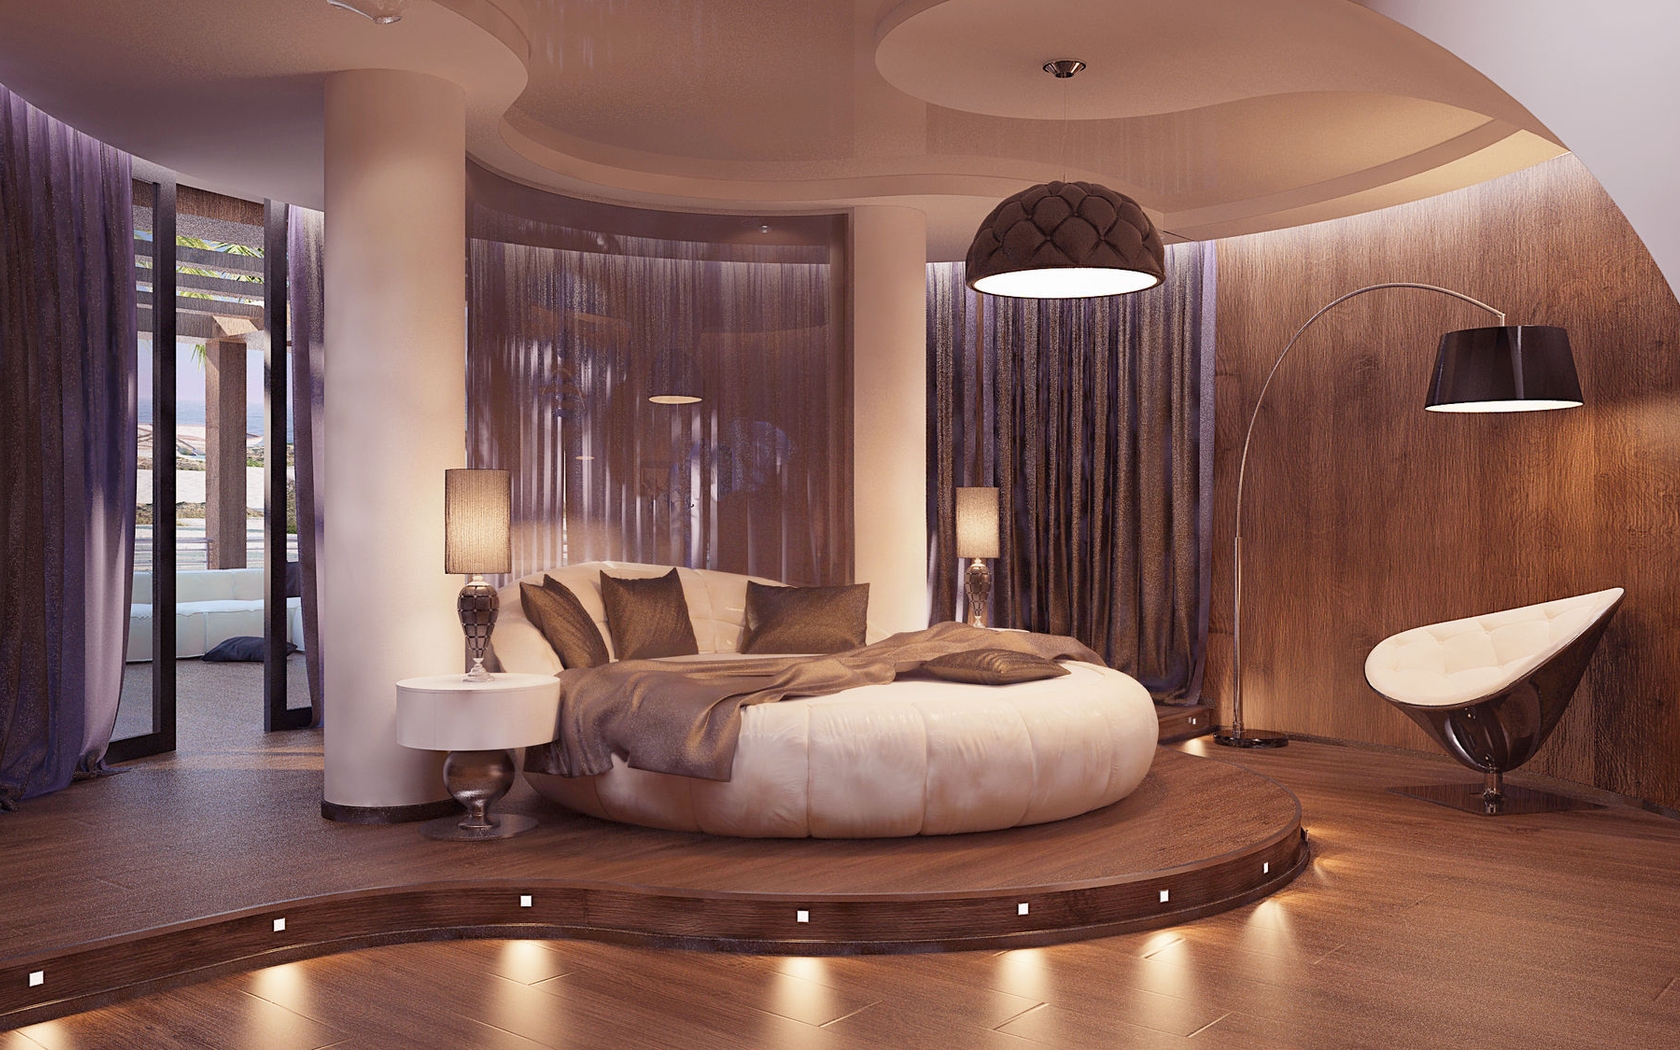 Image: Bedroom, bed, round, cushion, lamp, floor lamp, curtains, columns